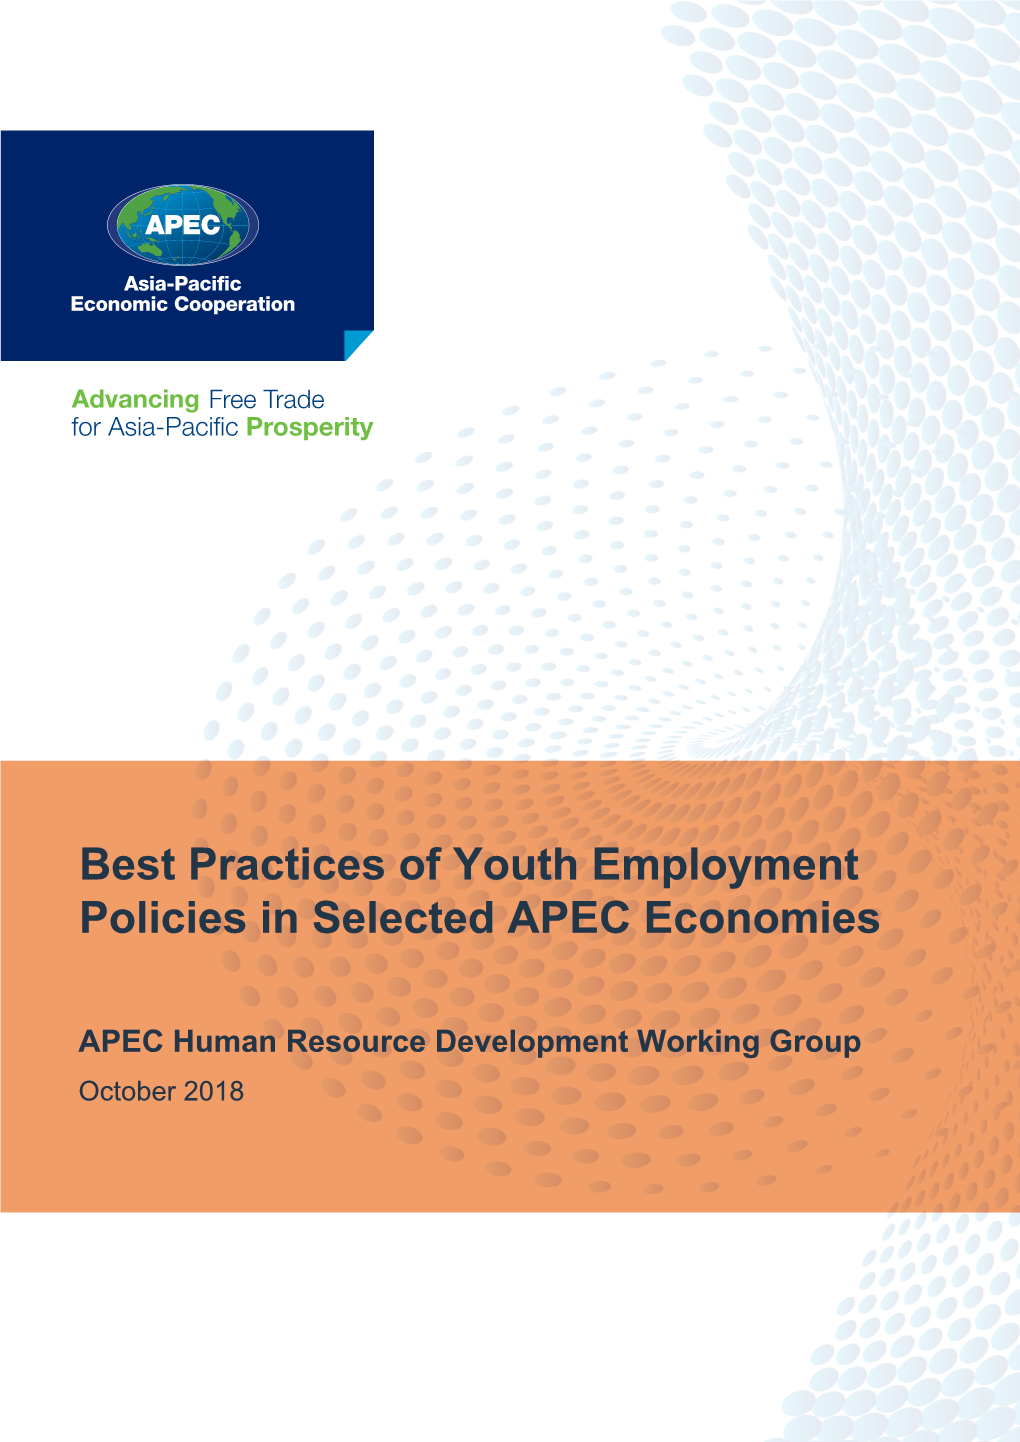 Best Practices of Youth Employment Policies in Selected APEC Economies